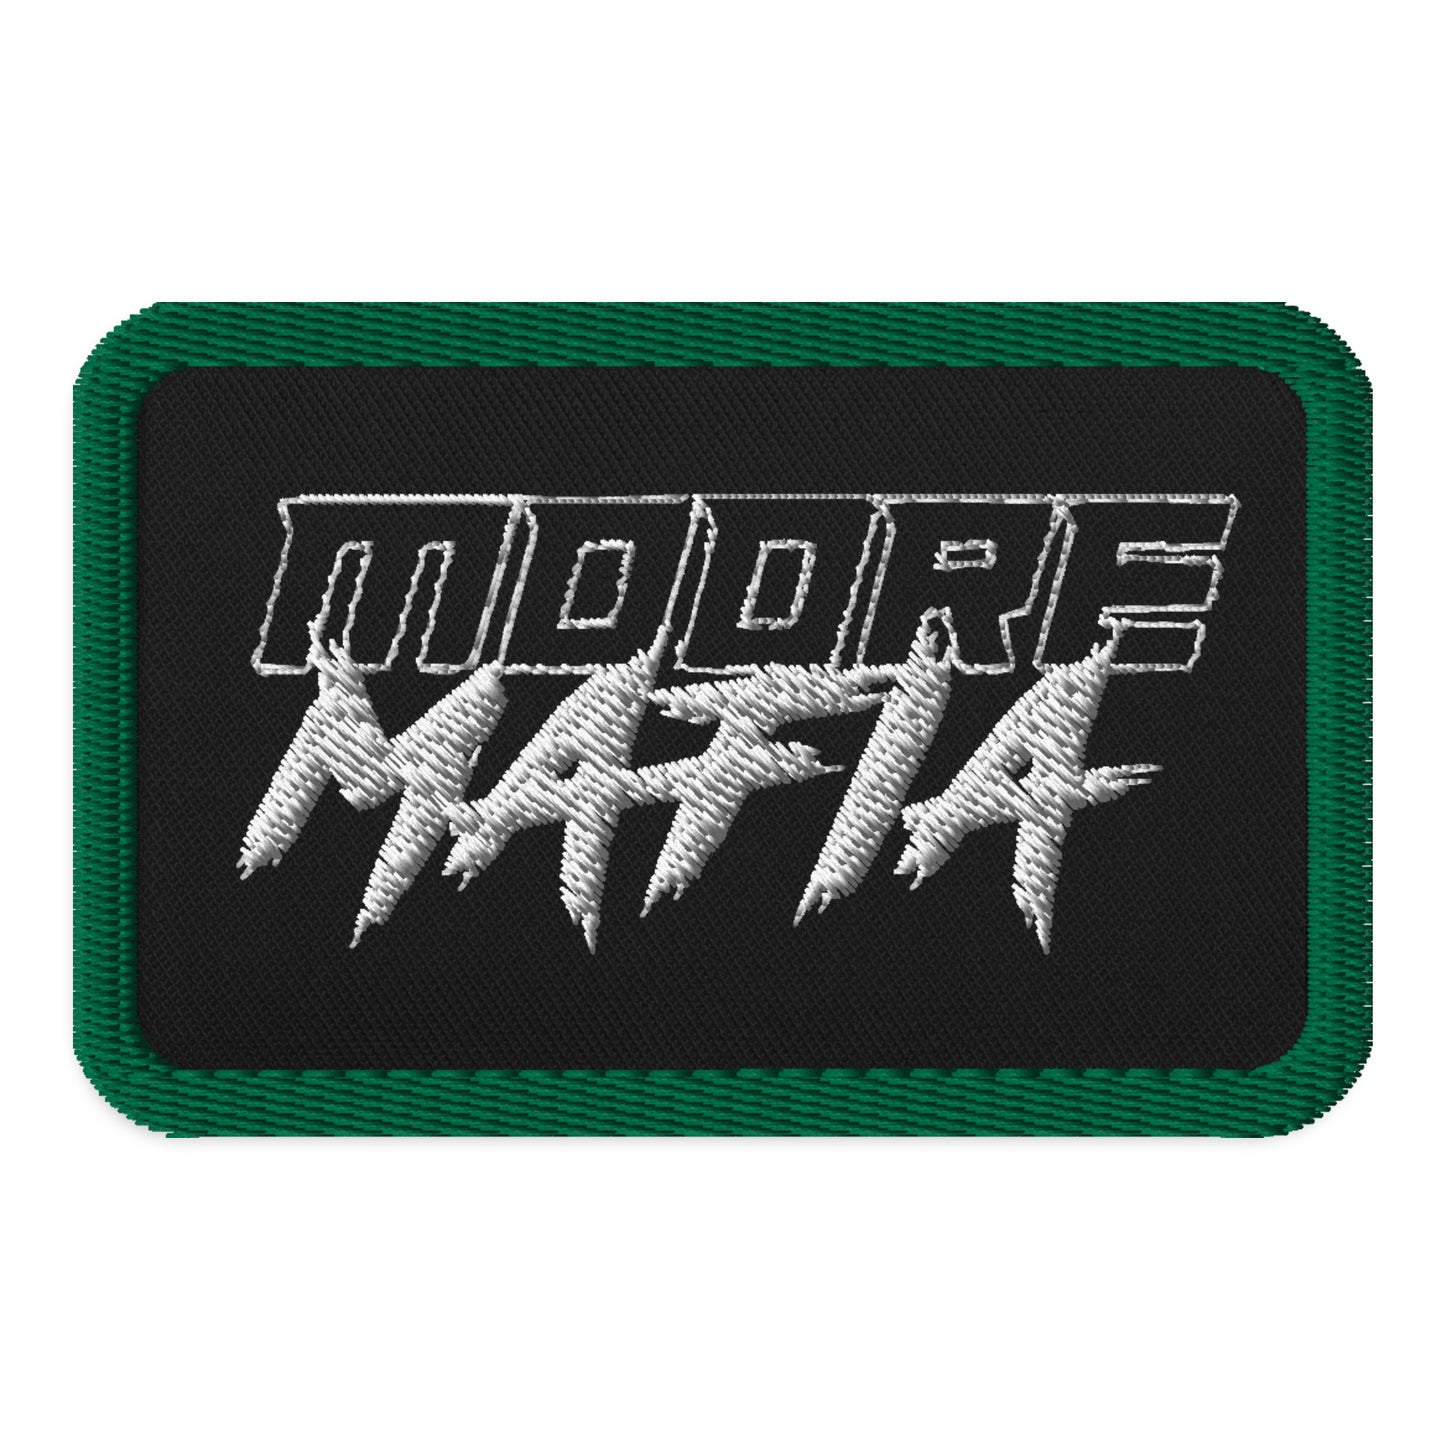 Moore Mafia Embroidered Patch